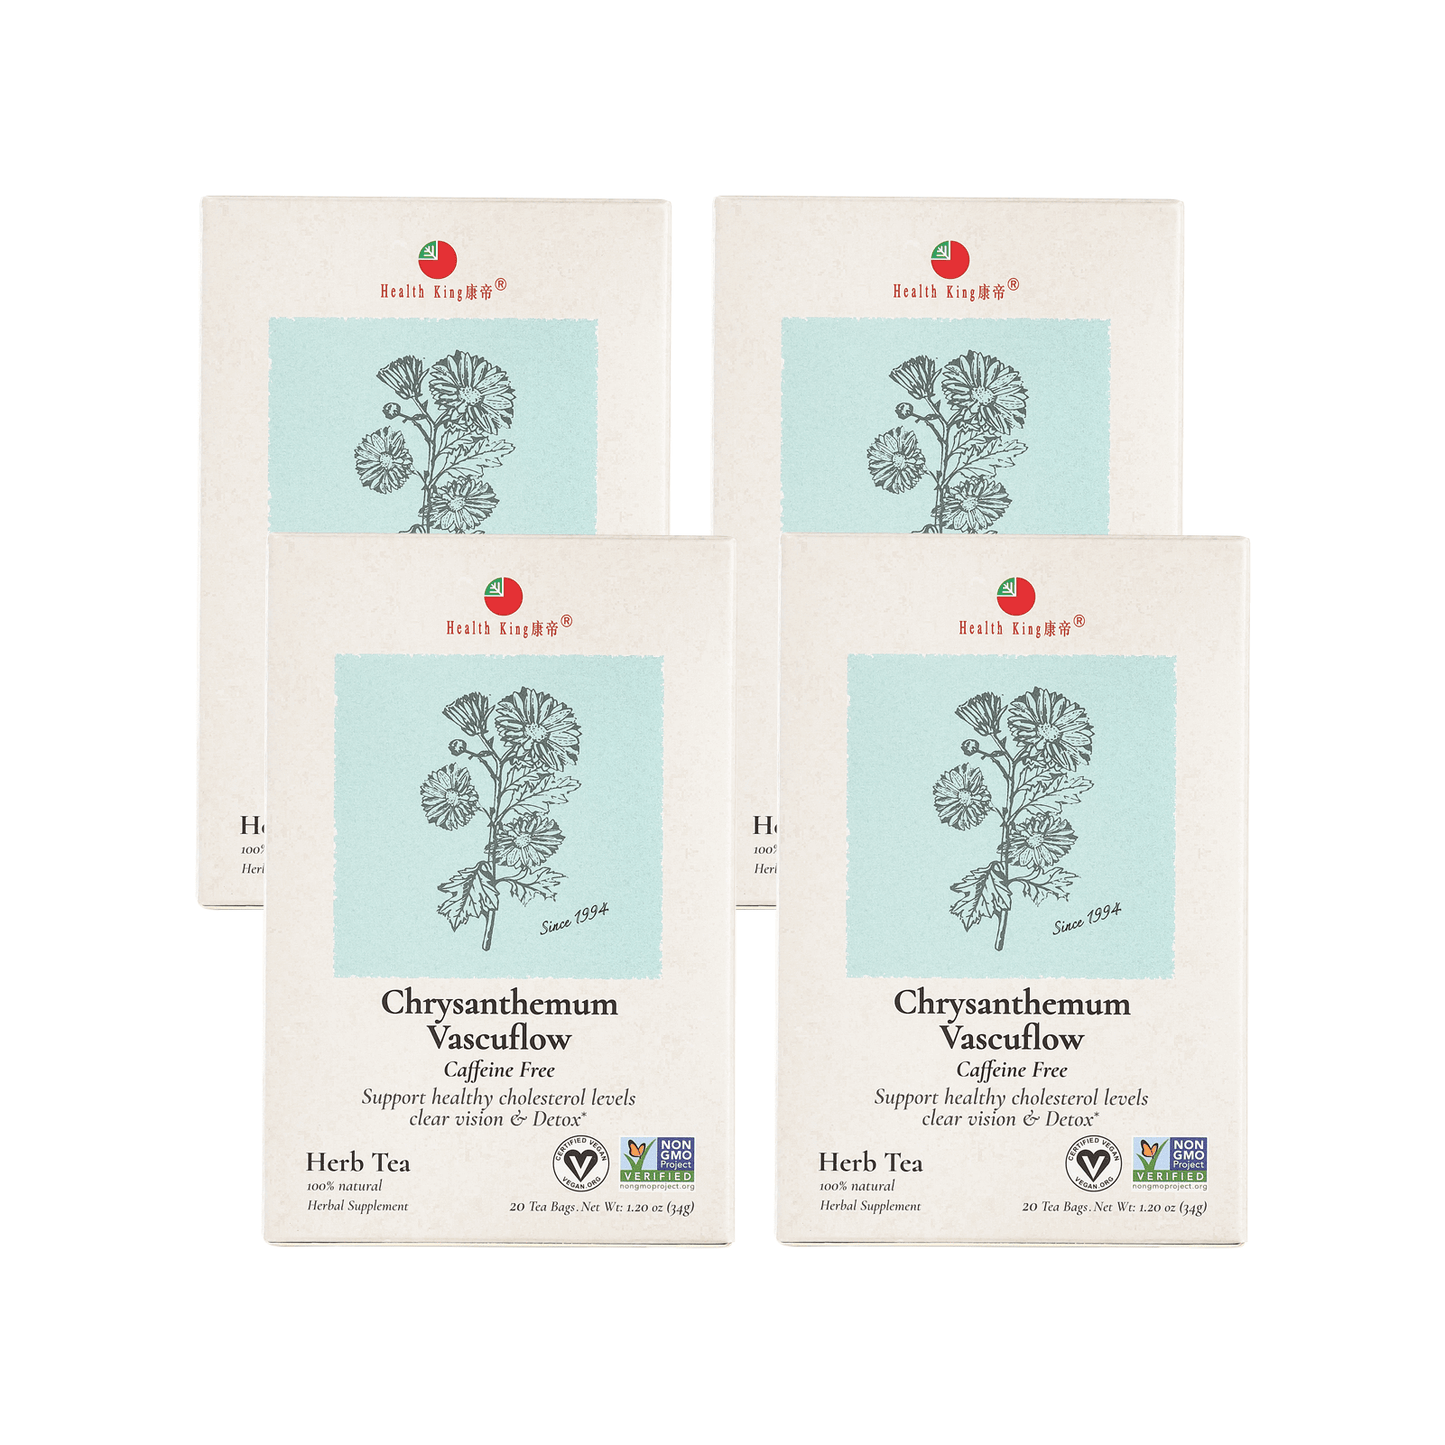 Four packets of Chrysanthemum Herb Tea promoting clear vision and detox